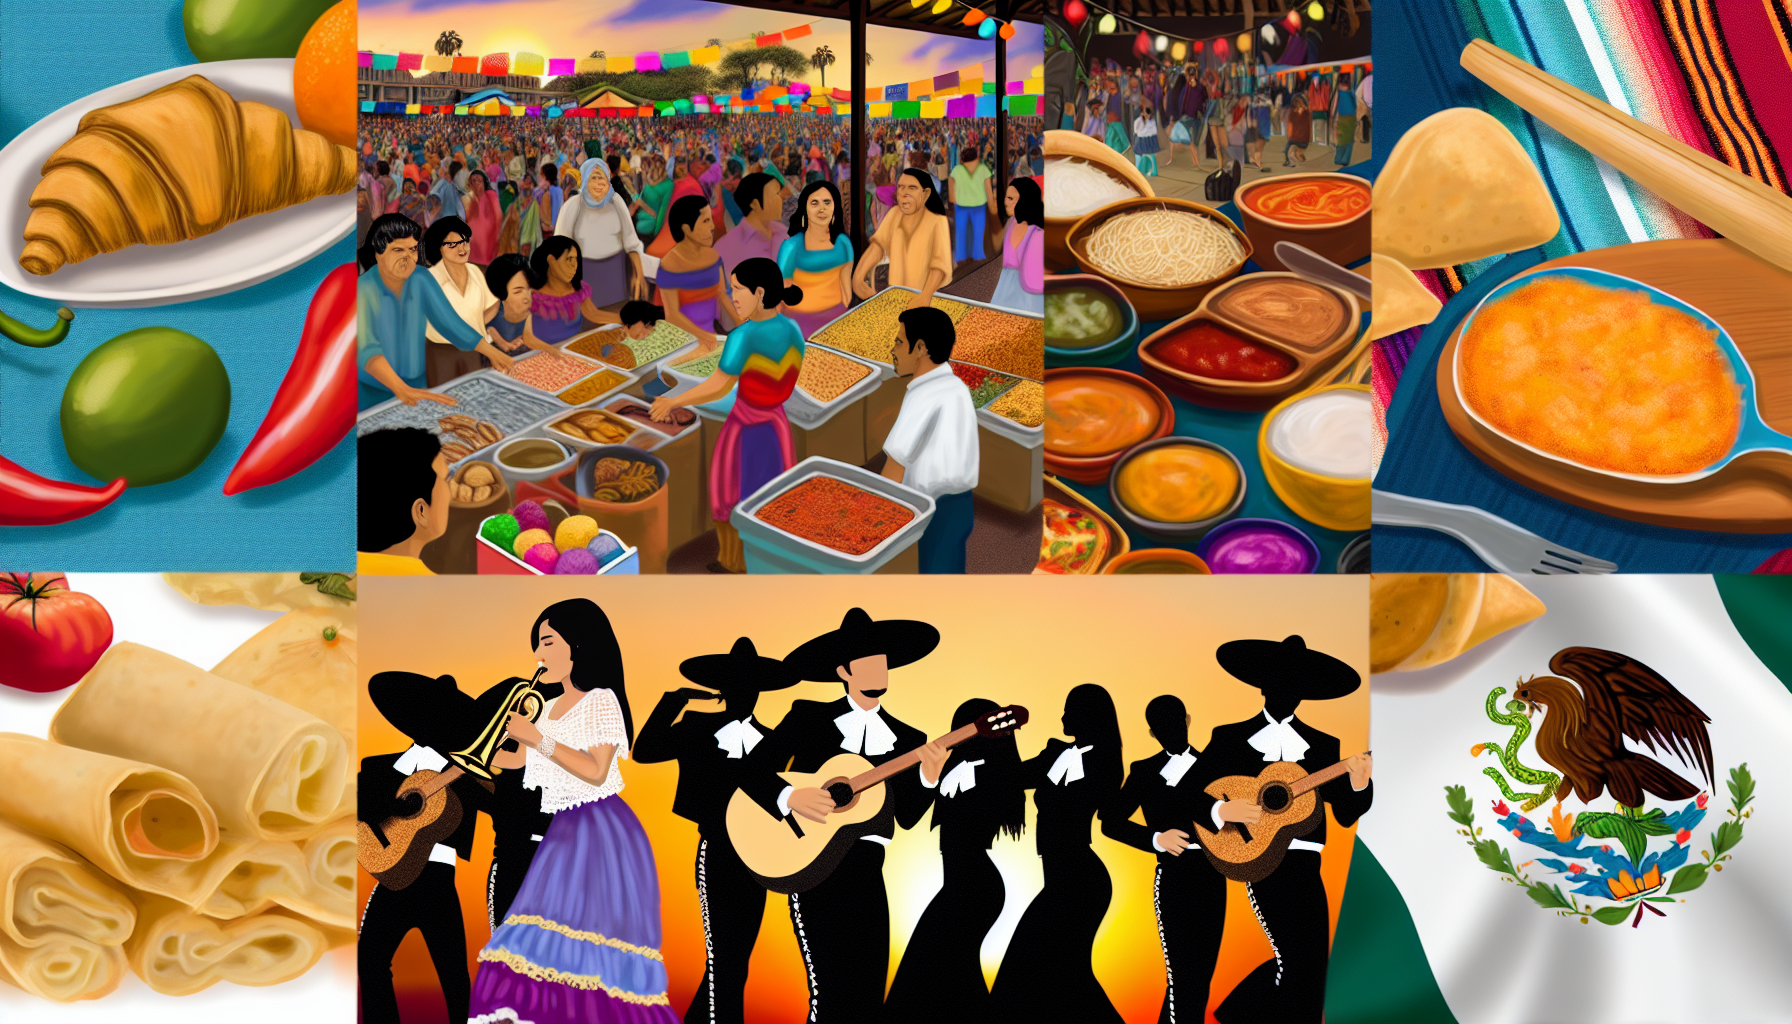 Exploring Hispanic culture through blogs, featuring vibrant images of traditional Hispanic food, music, and cultural celebrations.